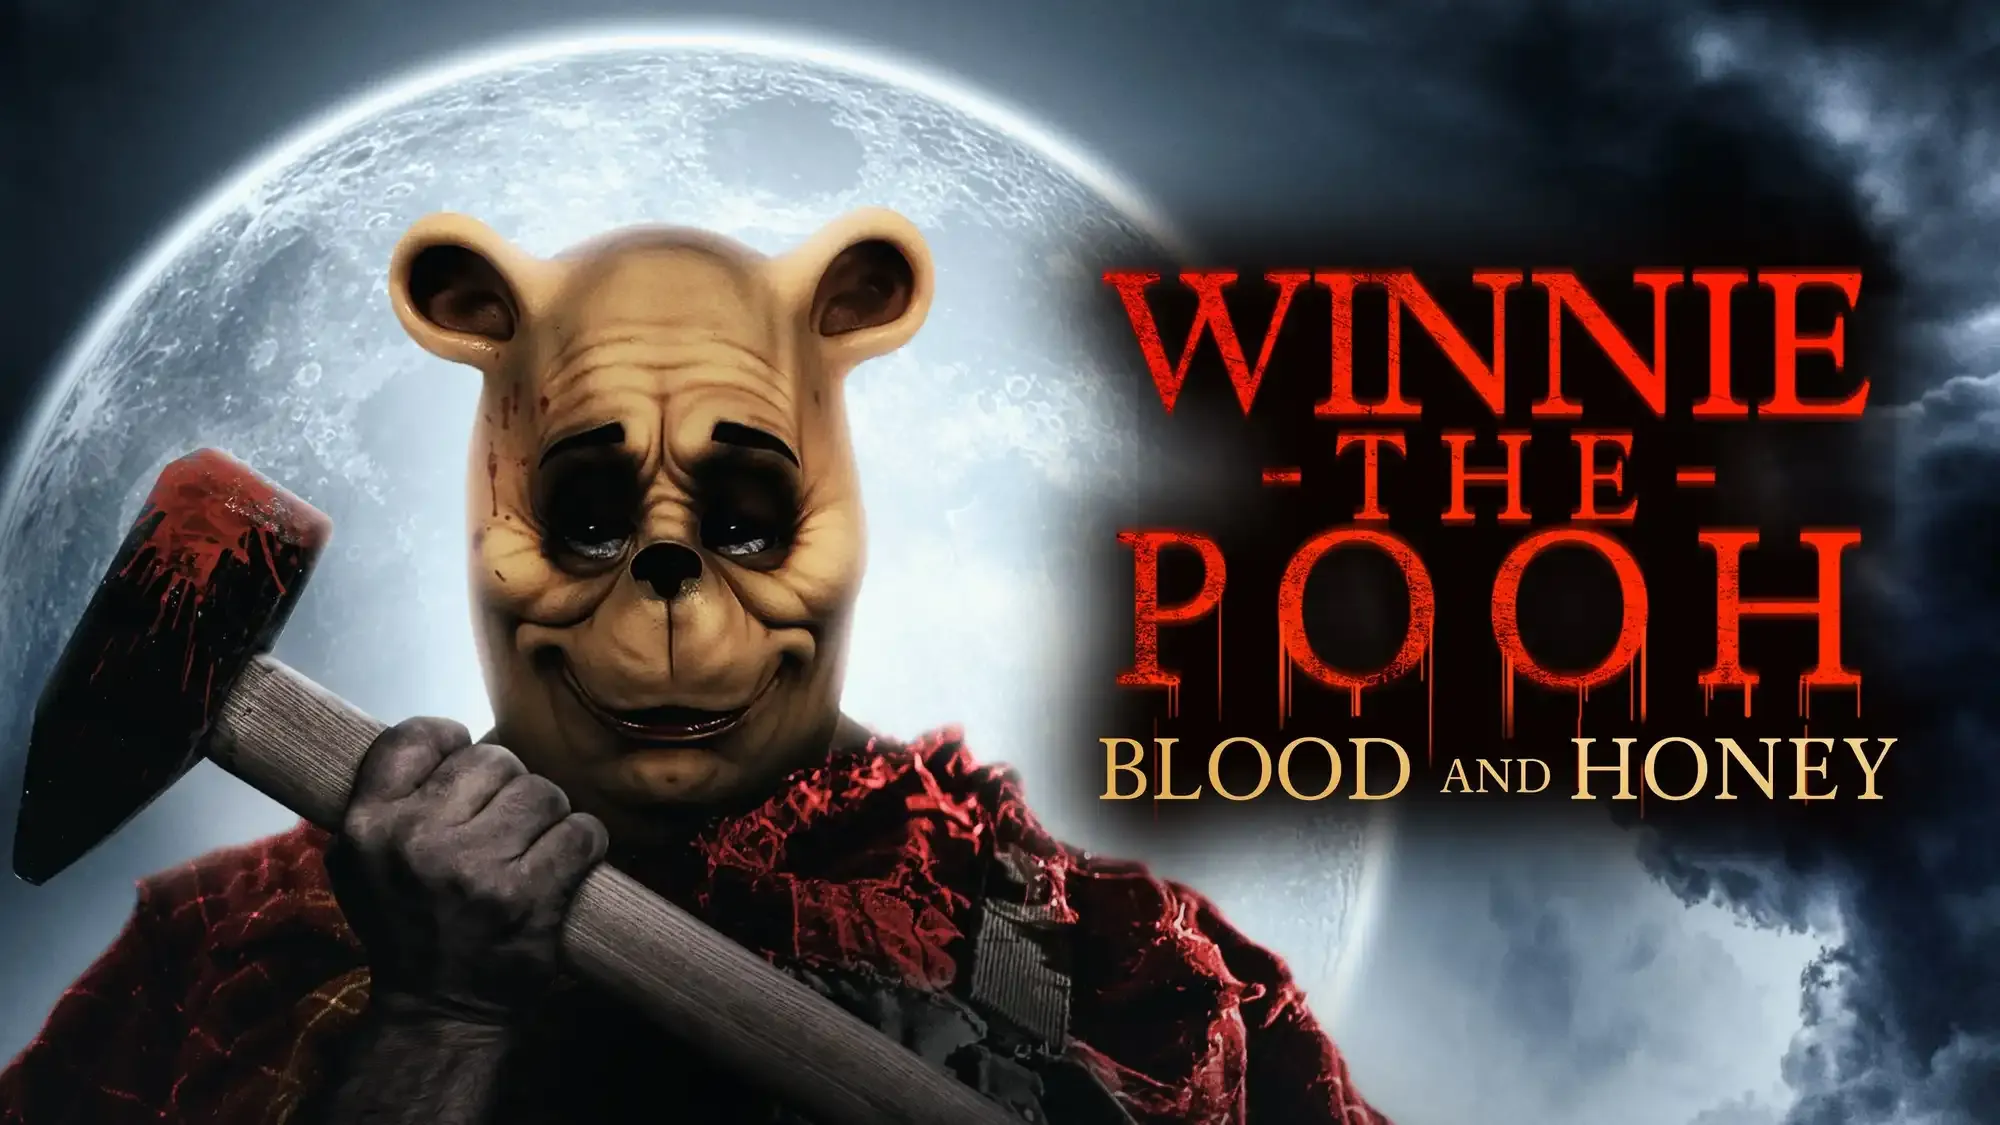 Winnie the Pooh: Blood and Honey movie review